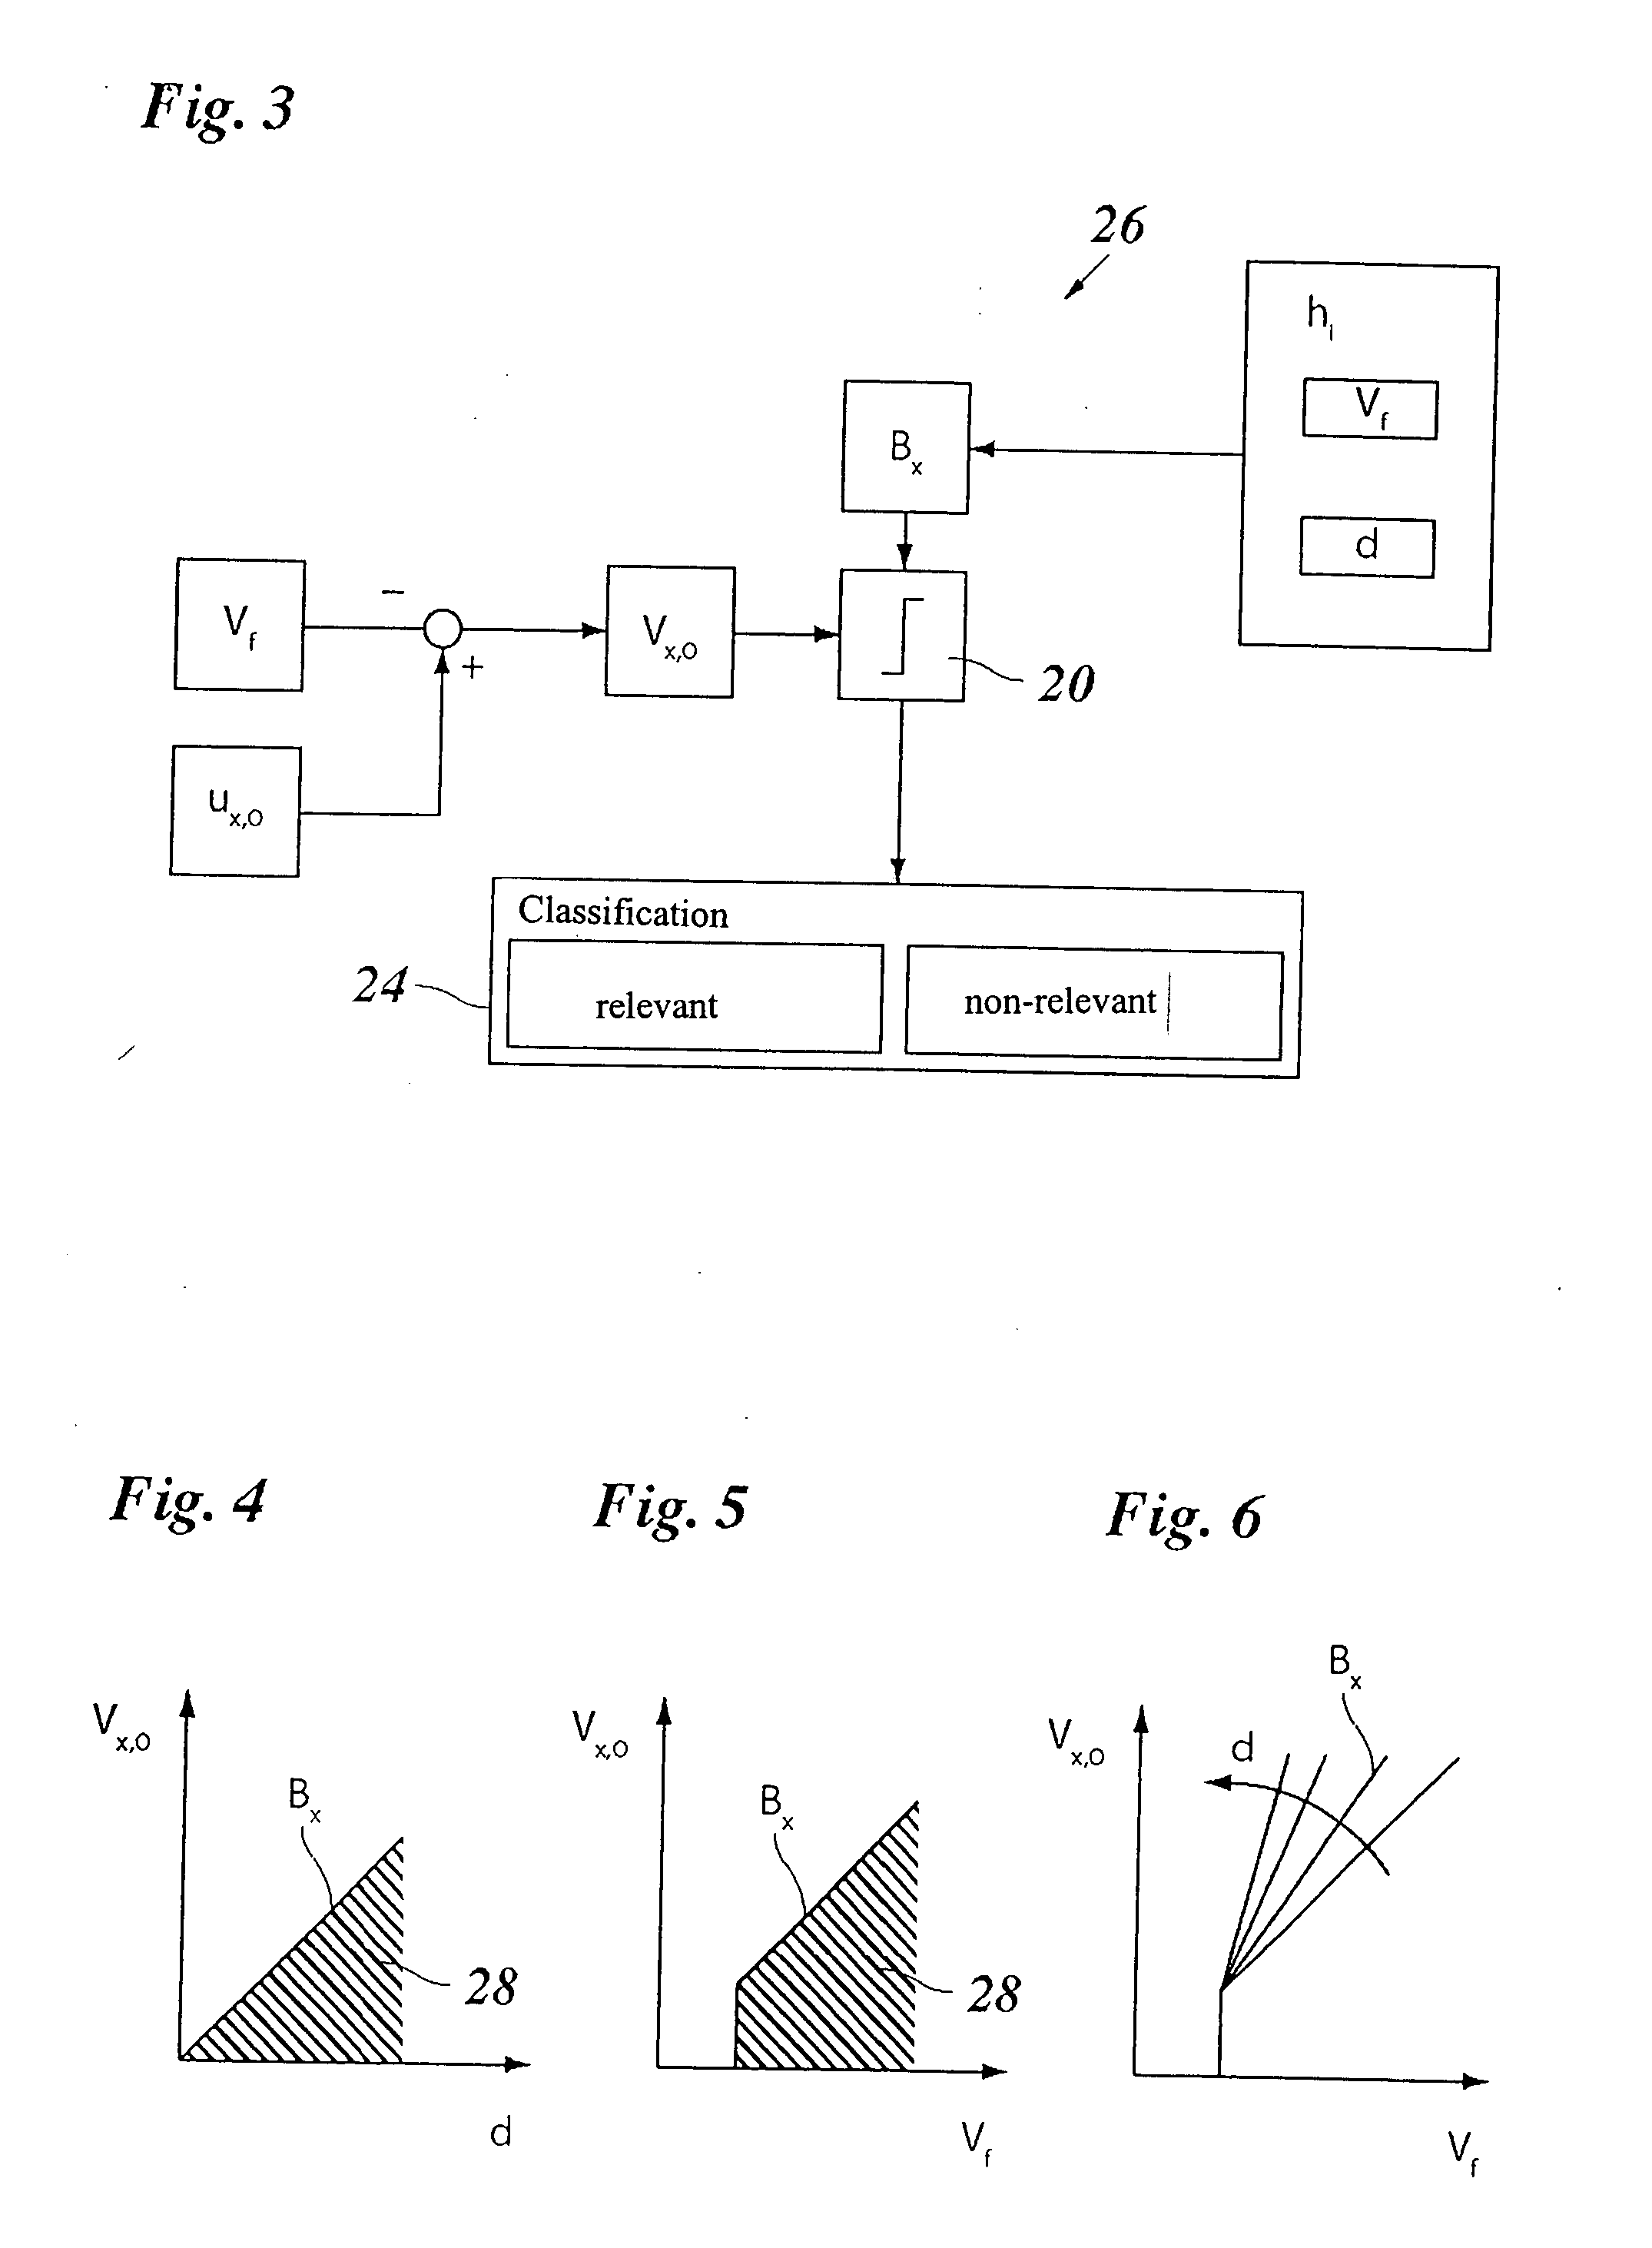 Driver assistance system having a device for recognizing stationary objects